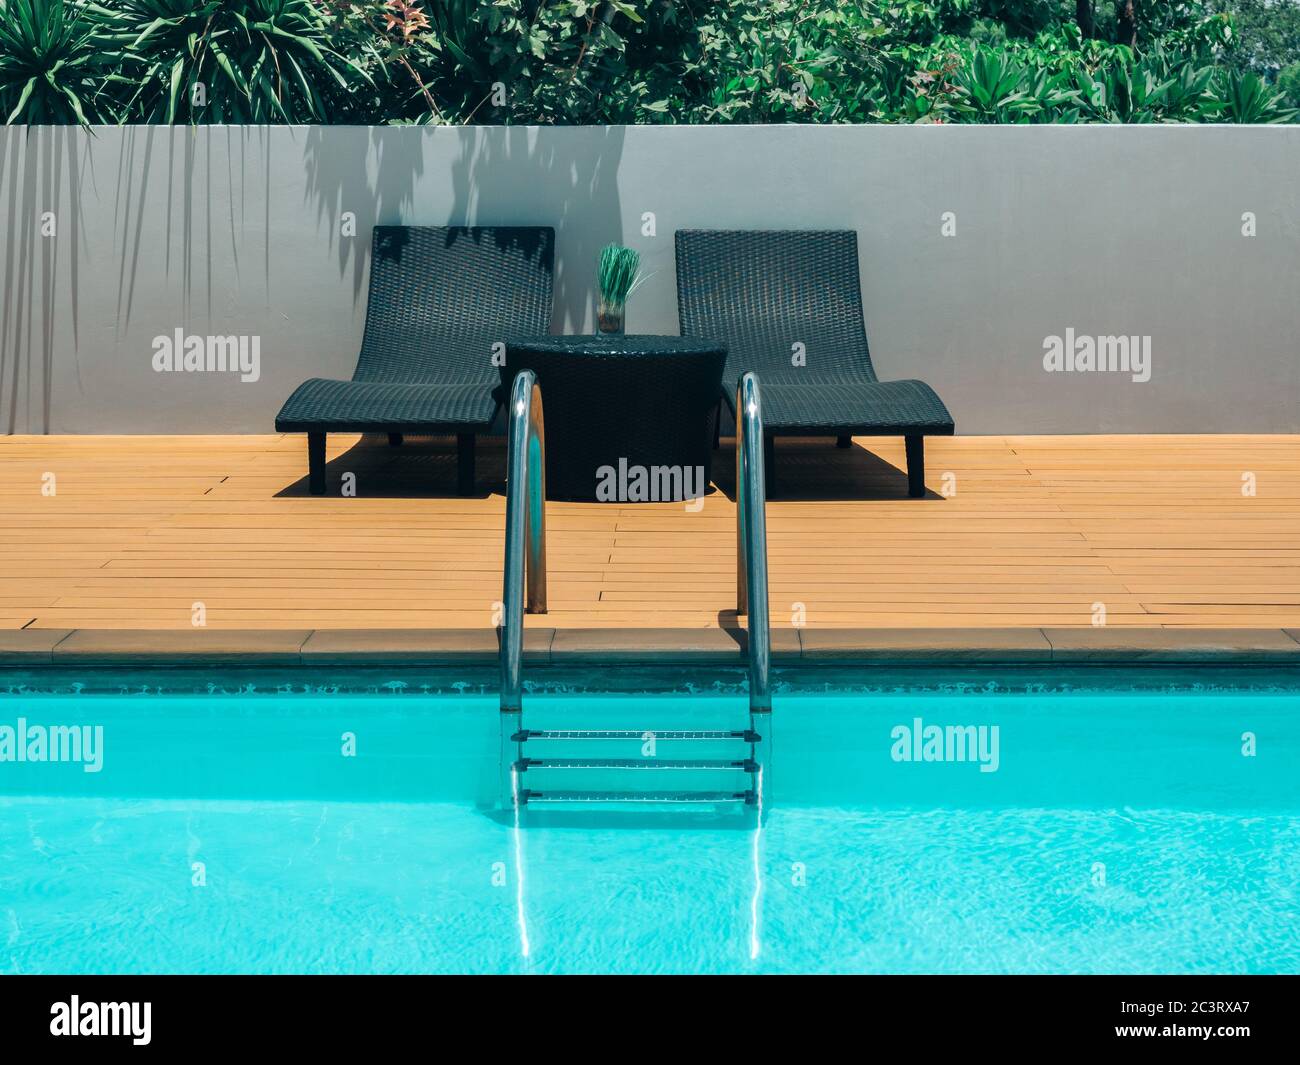 Outdoor swimming pool background minimal style. Grab bars ladder in the blue swimming pool with two black sunbed and green shrubs on grey wall. Stock Photo